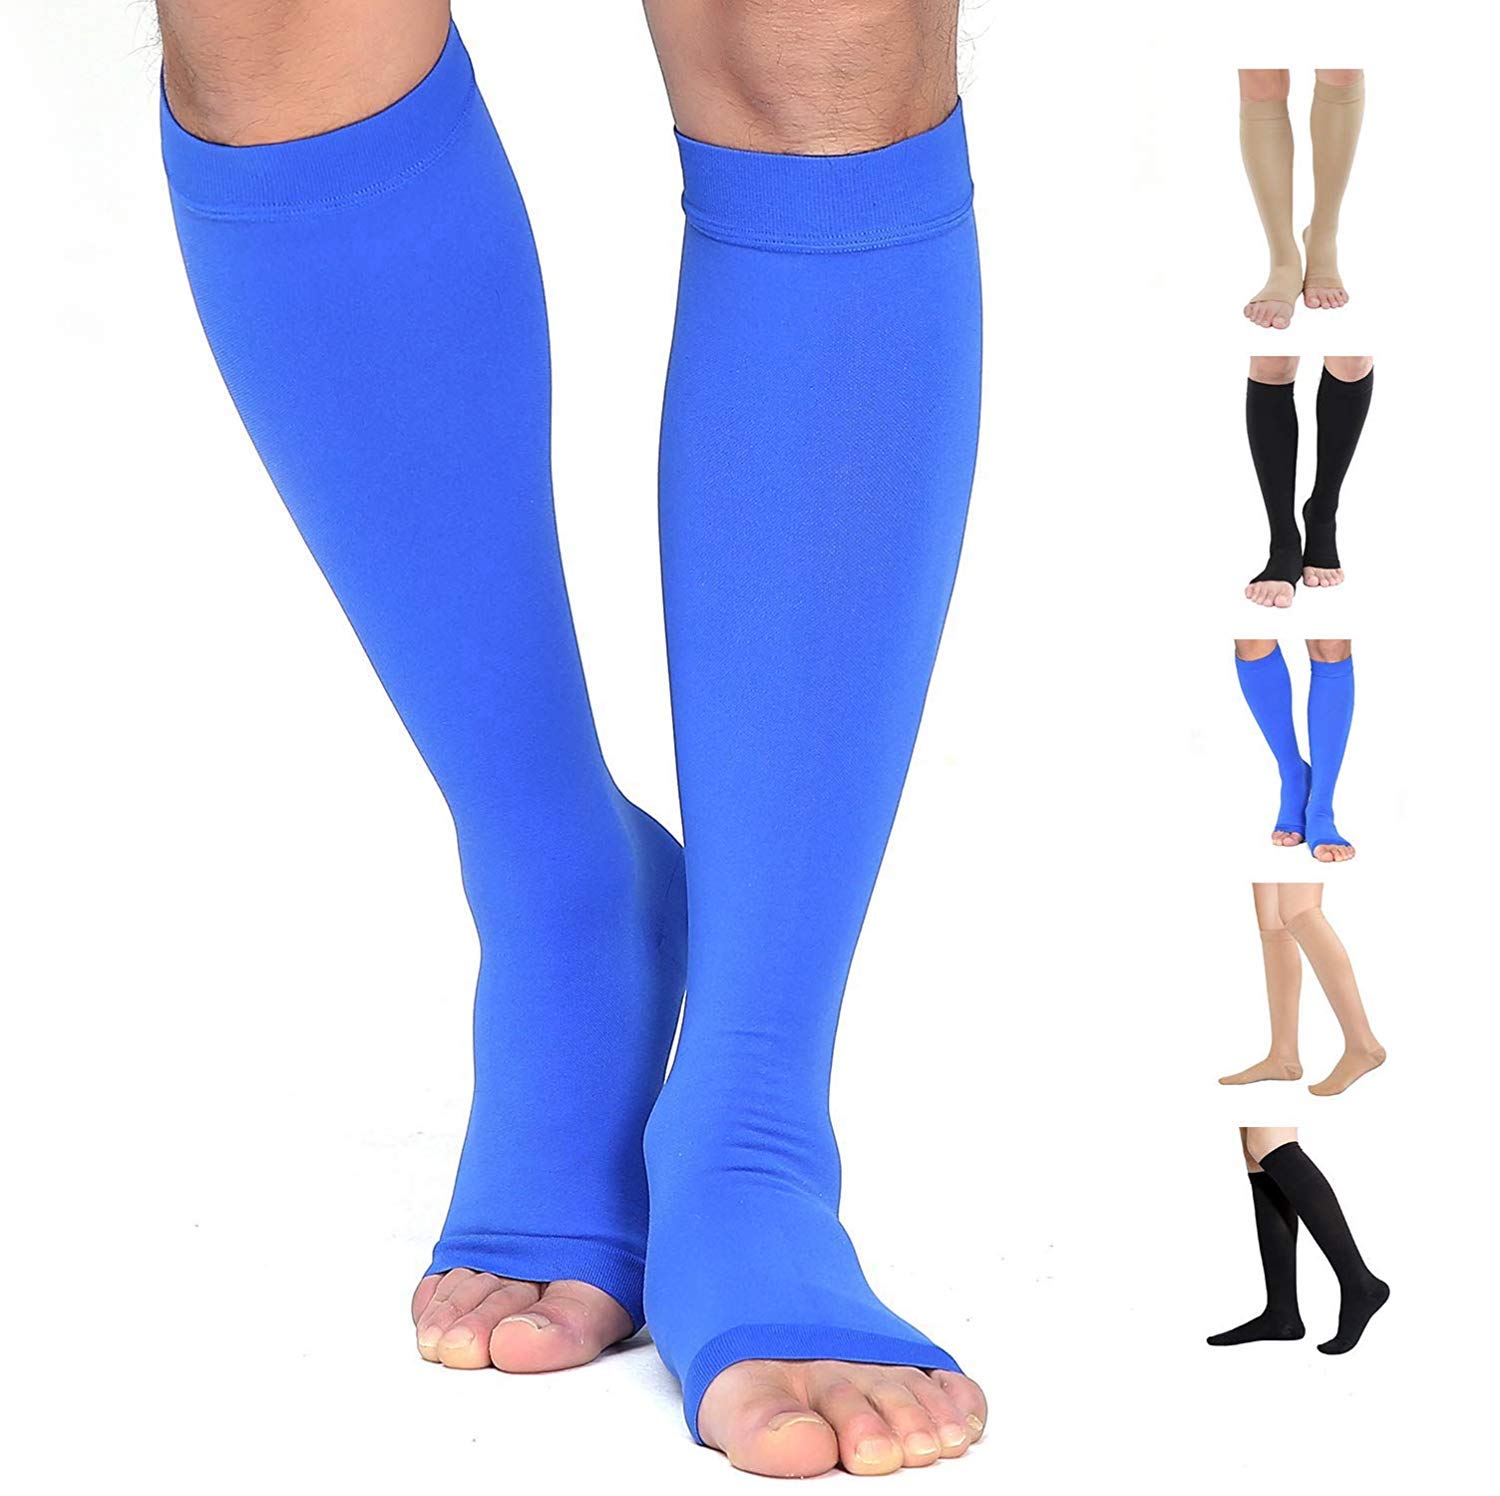 TOFLY Medical Compression Stockings 20-30 mmHg Knee High